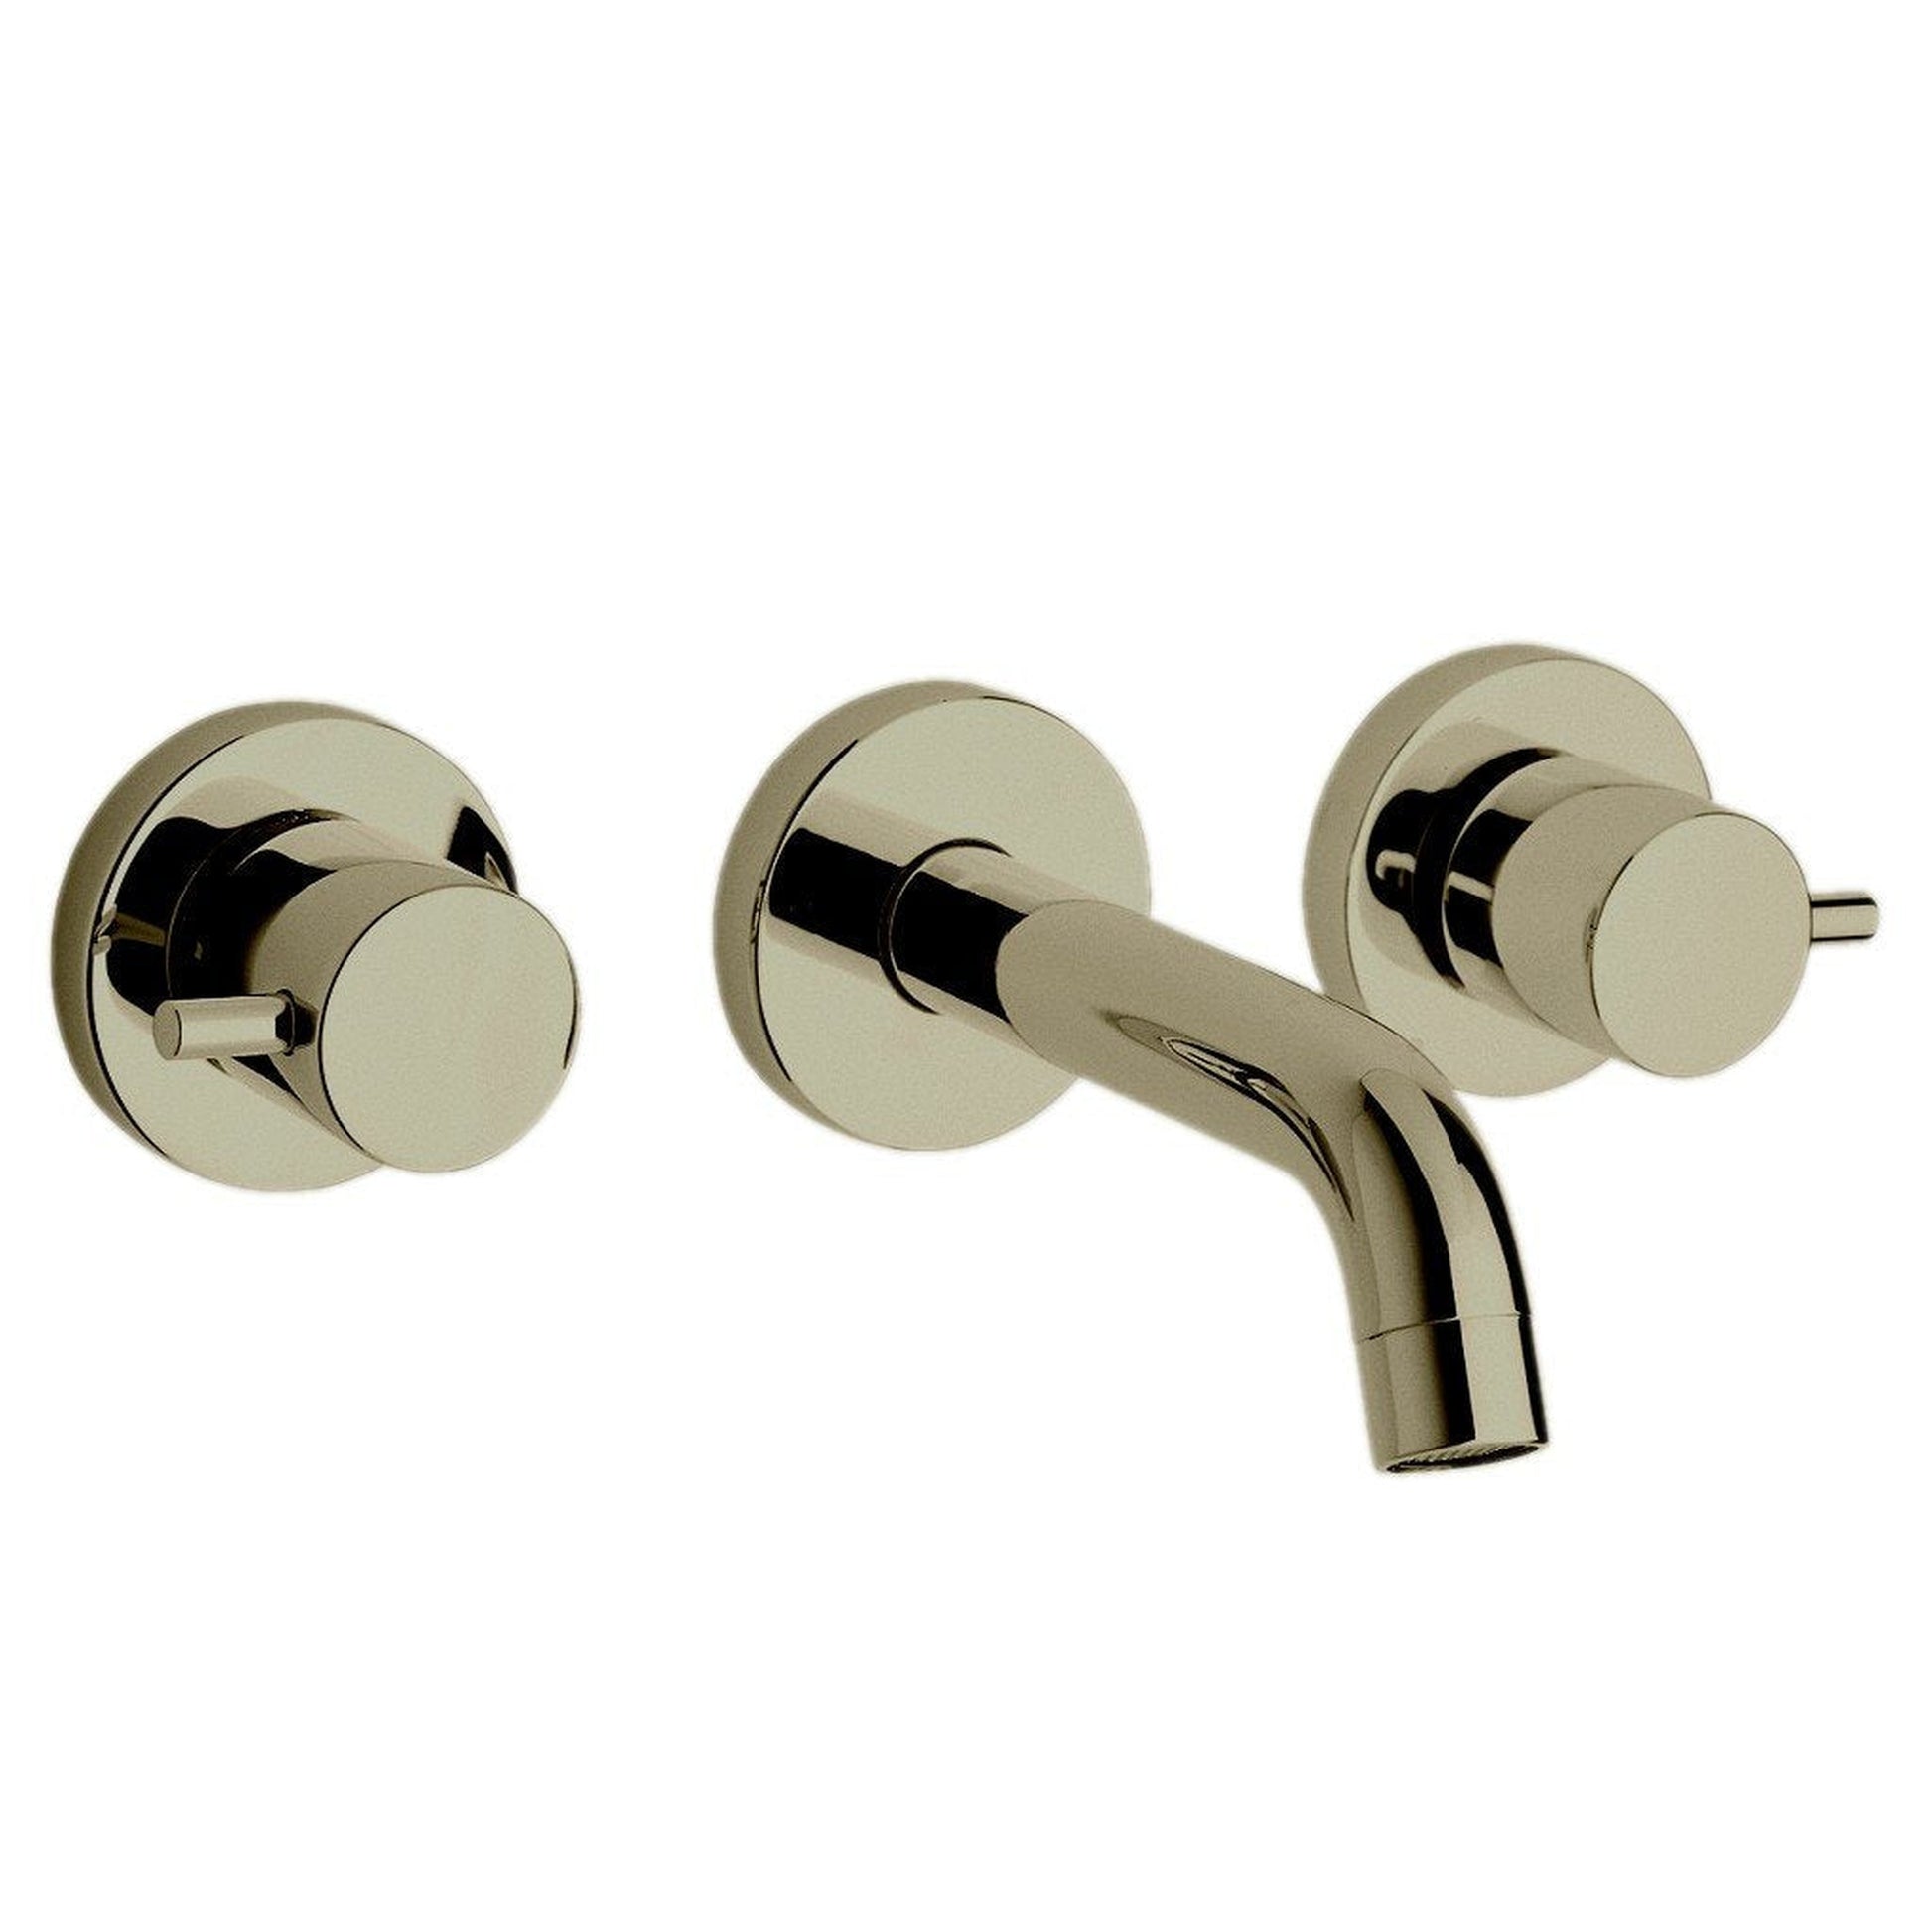 LaToscana Elba Brushed Nickel Wall-Mounted Lavatory Faucet With Lever Handles